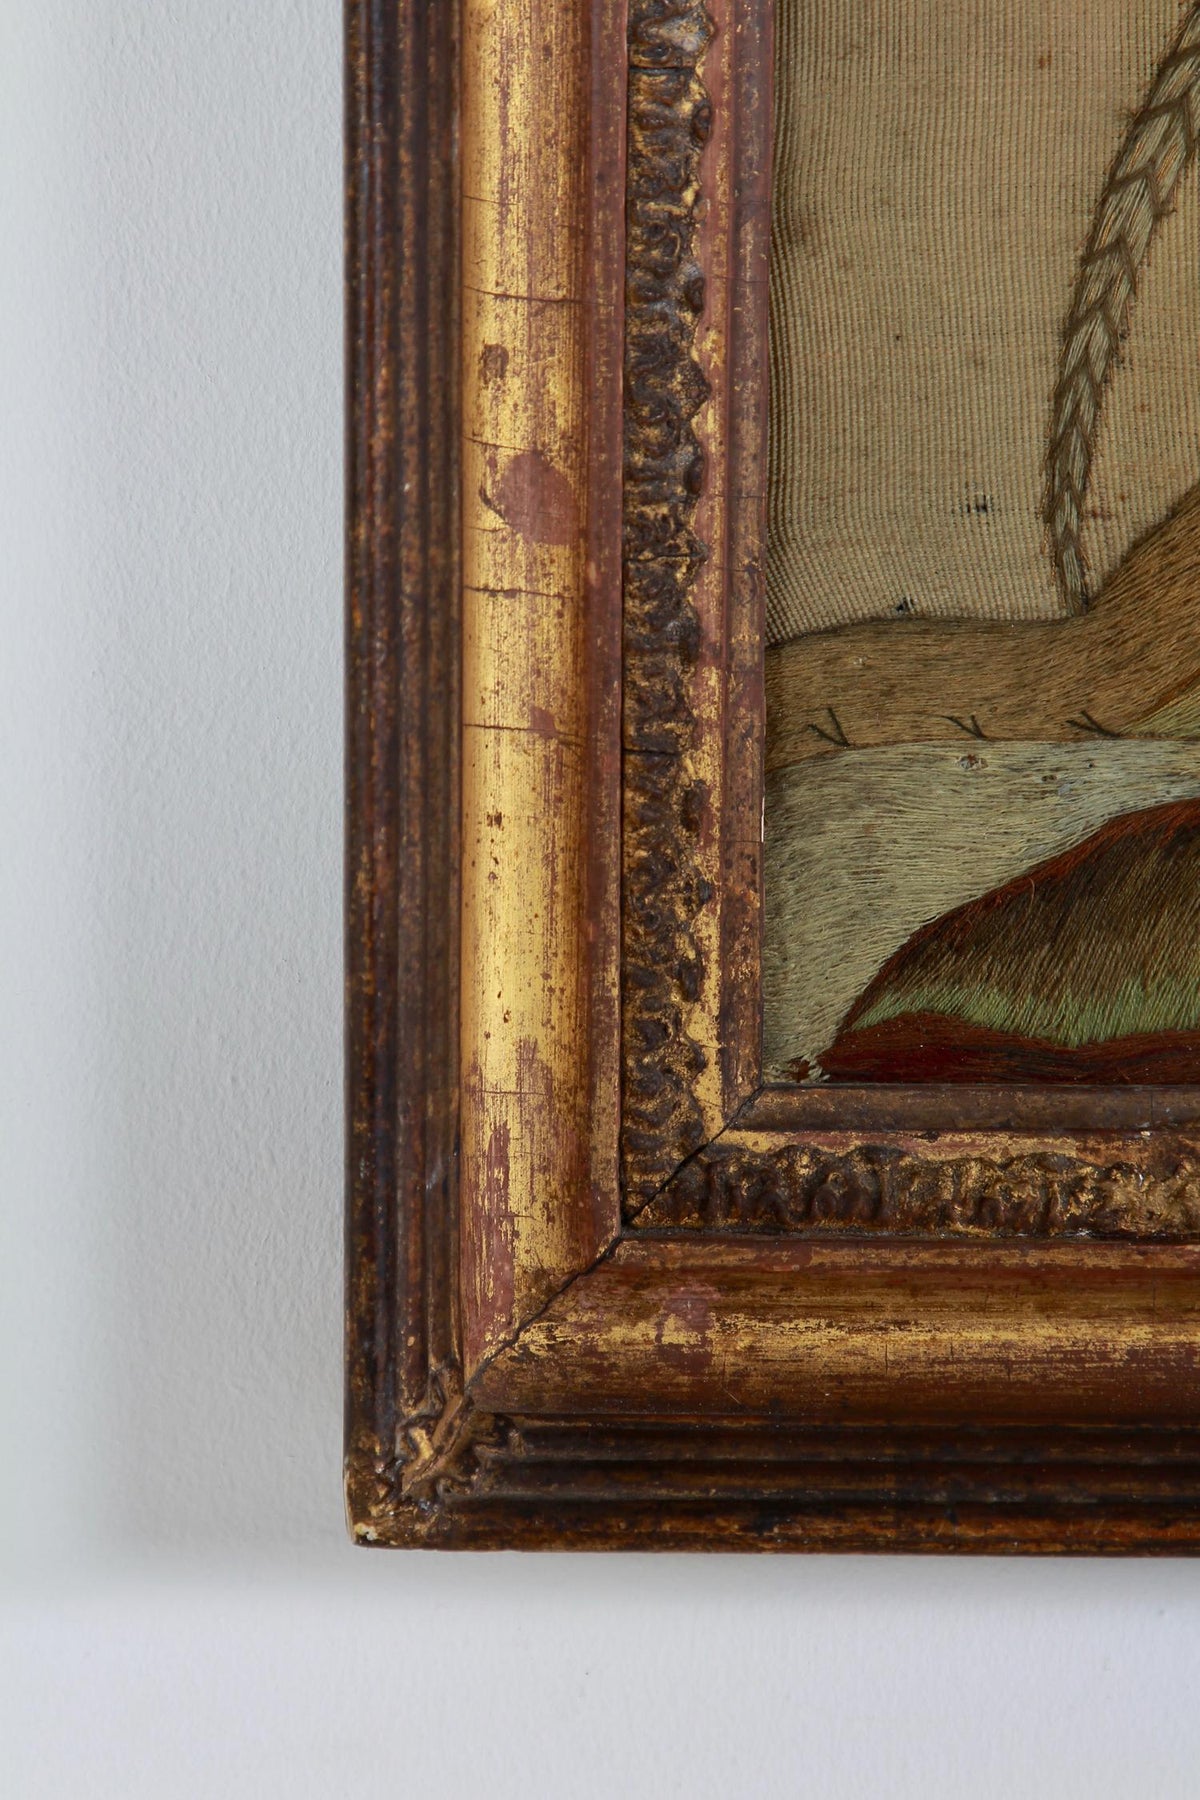 Exquisite English 18thC Silkwork Embroidery in Giltwood Frame